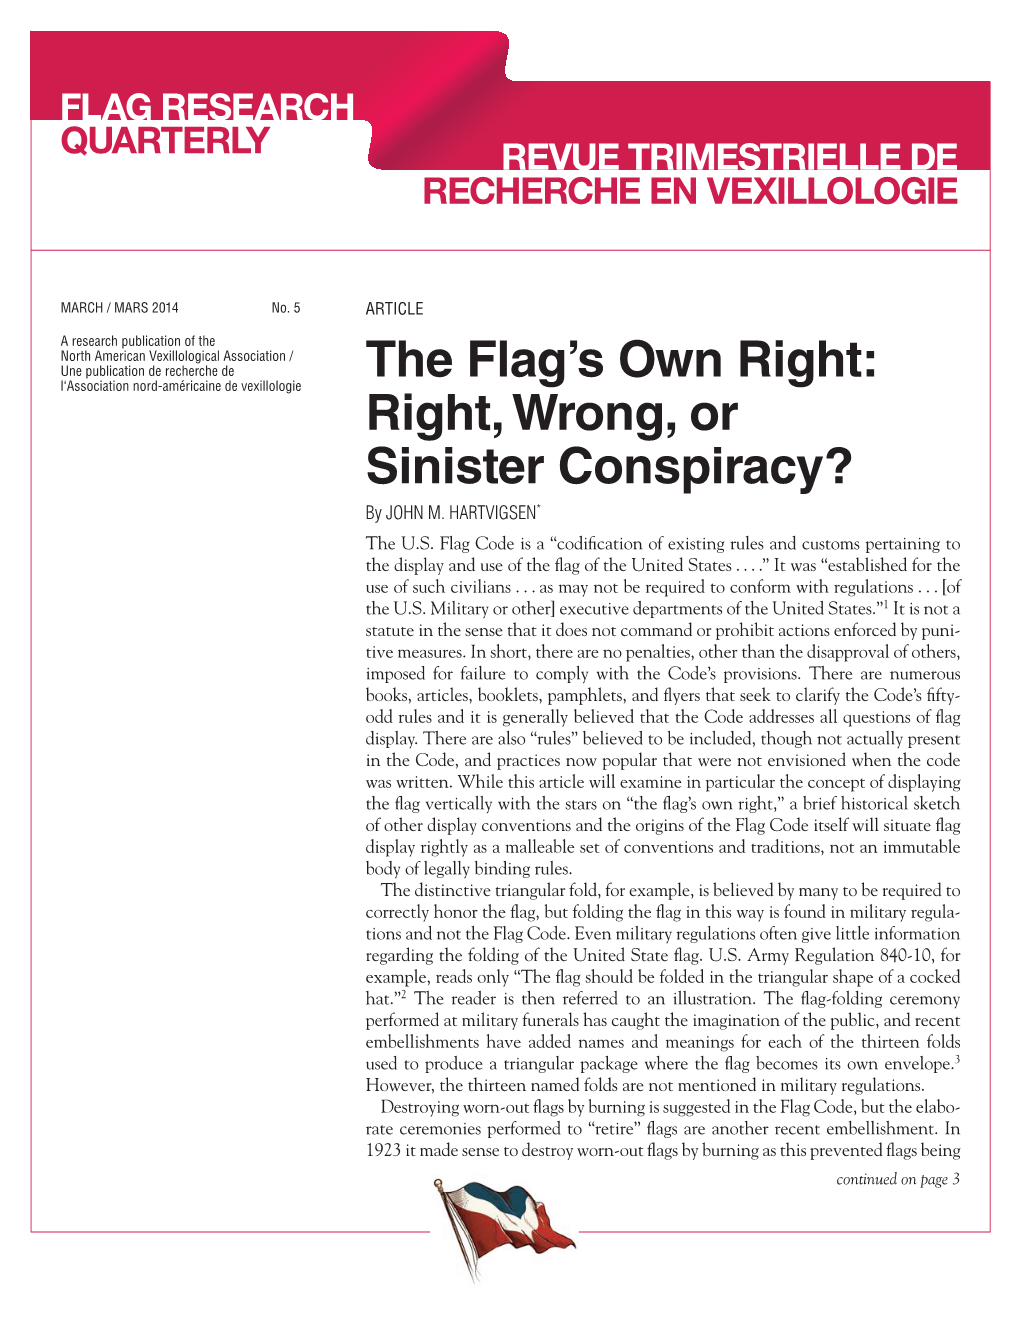 Flag Research Quarterly, March 2014, No. 5